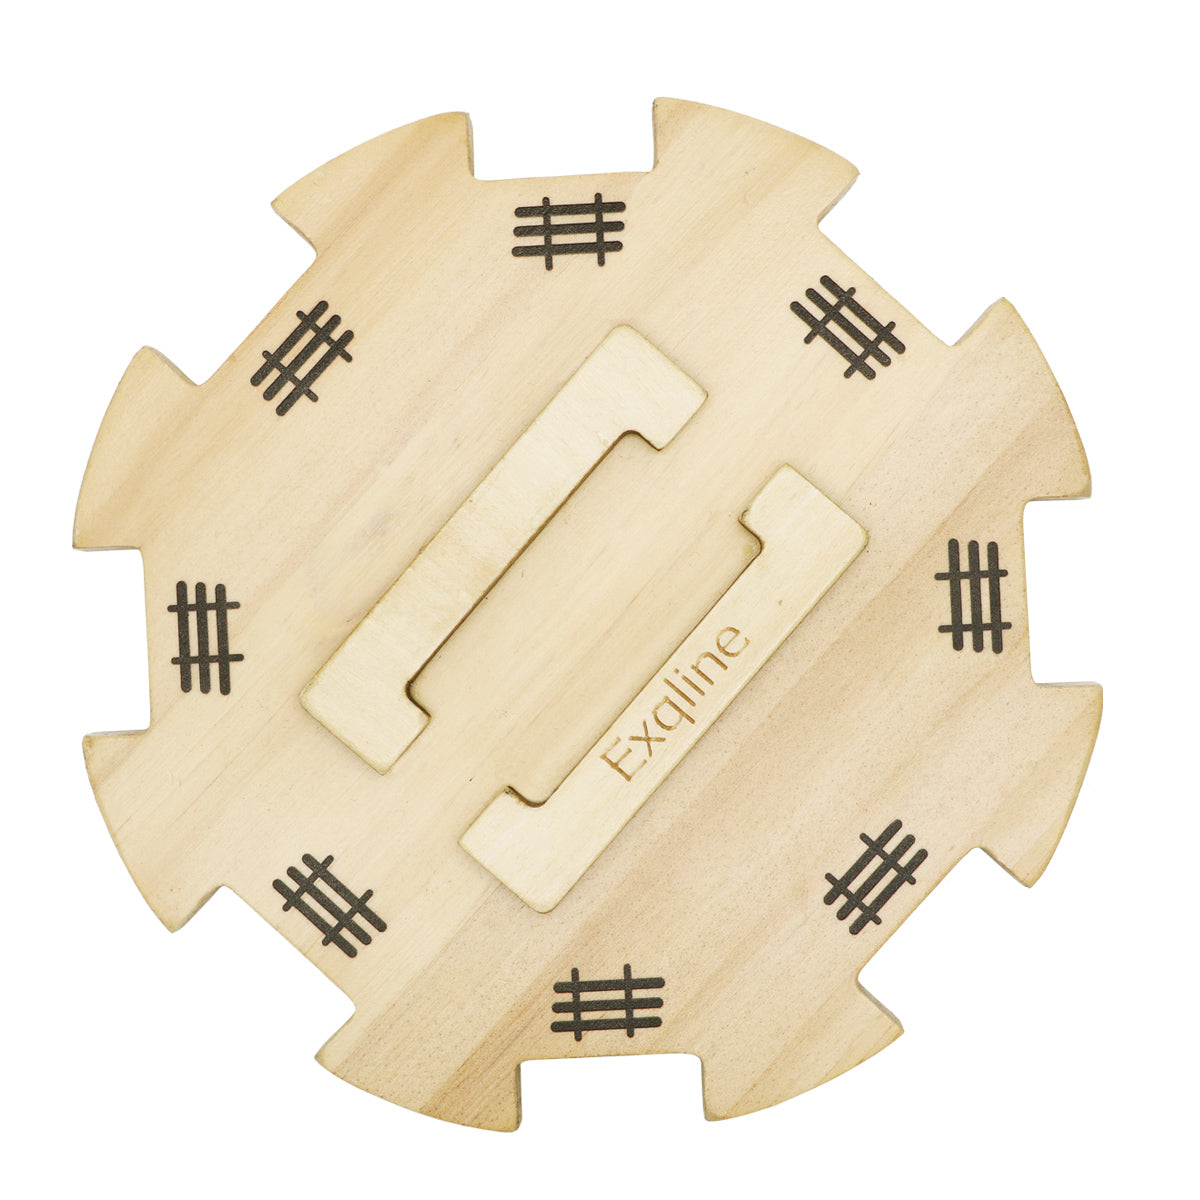 solid-wooden-hub-centerpiece-for-mexican-train-dominoes